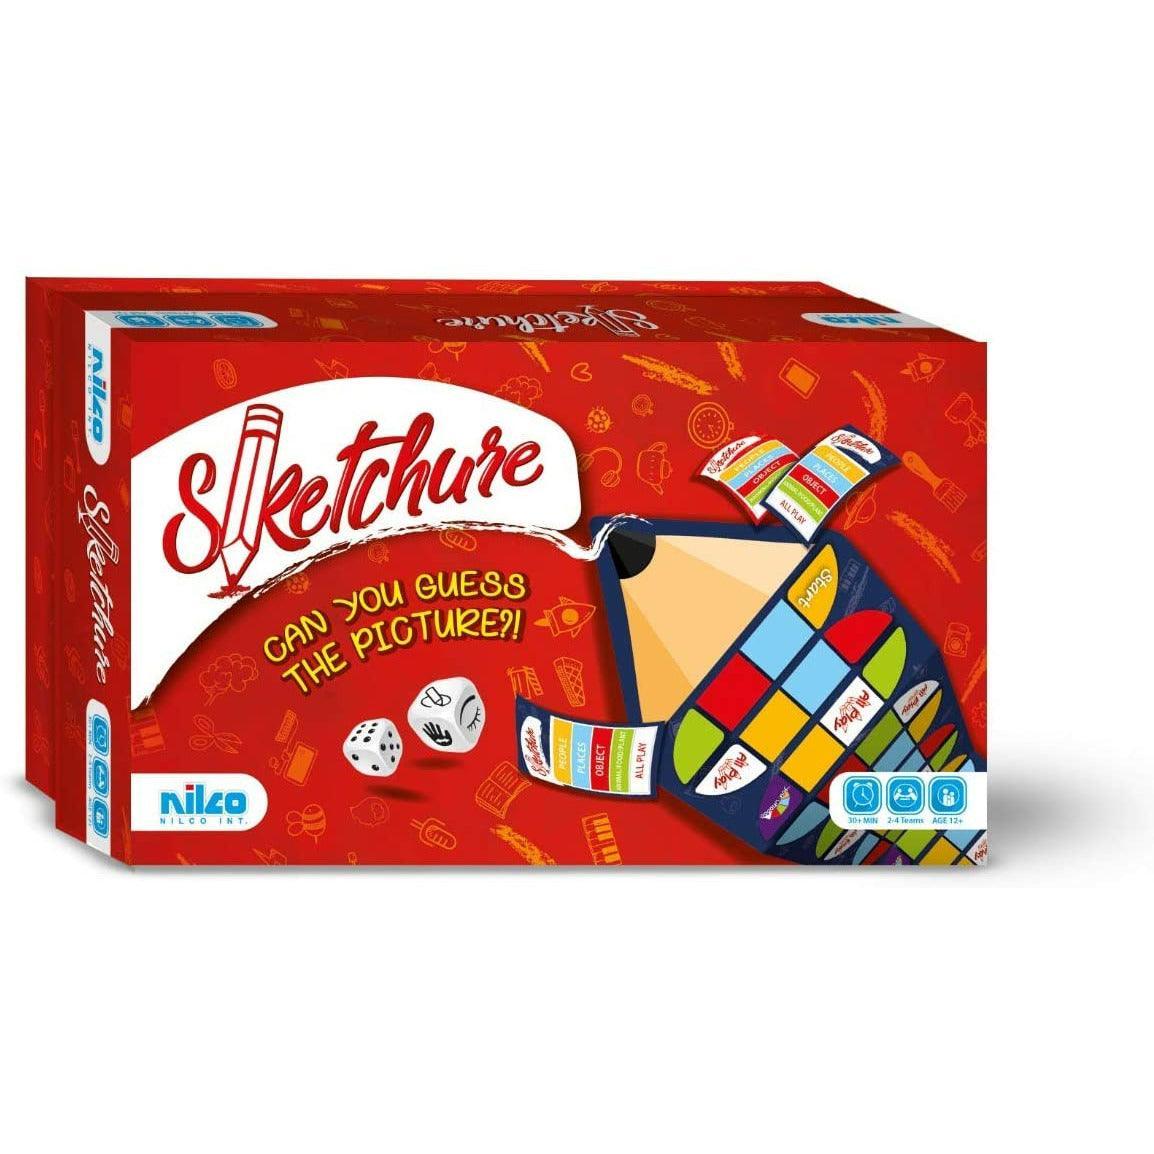 English Sketchure Board Game - Ourkids - Nilco